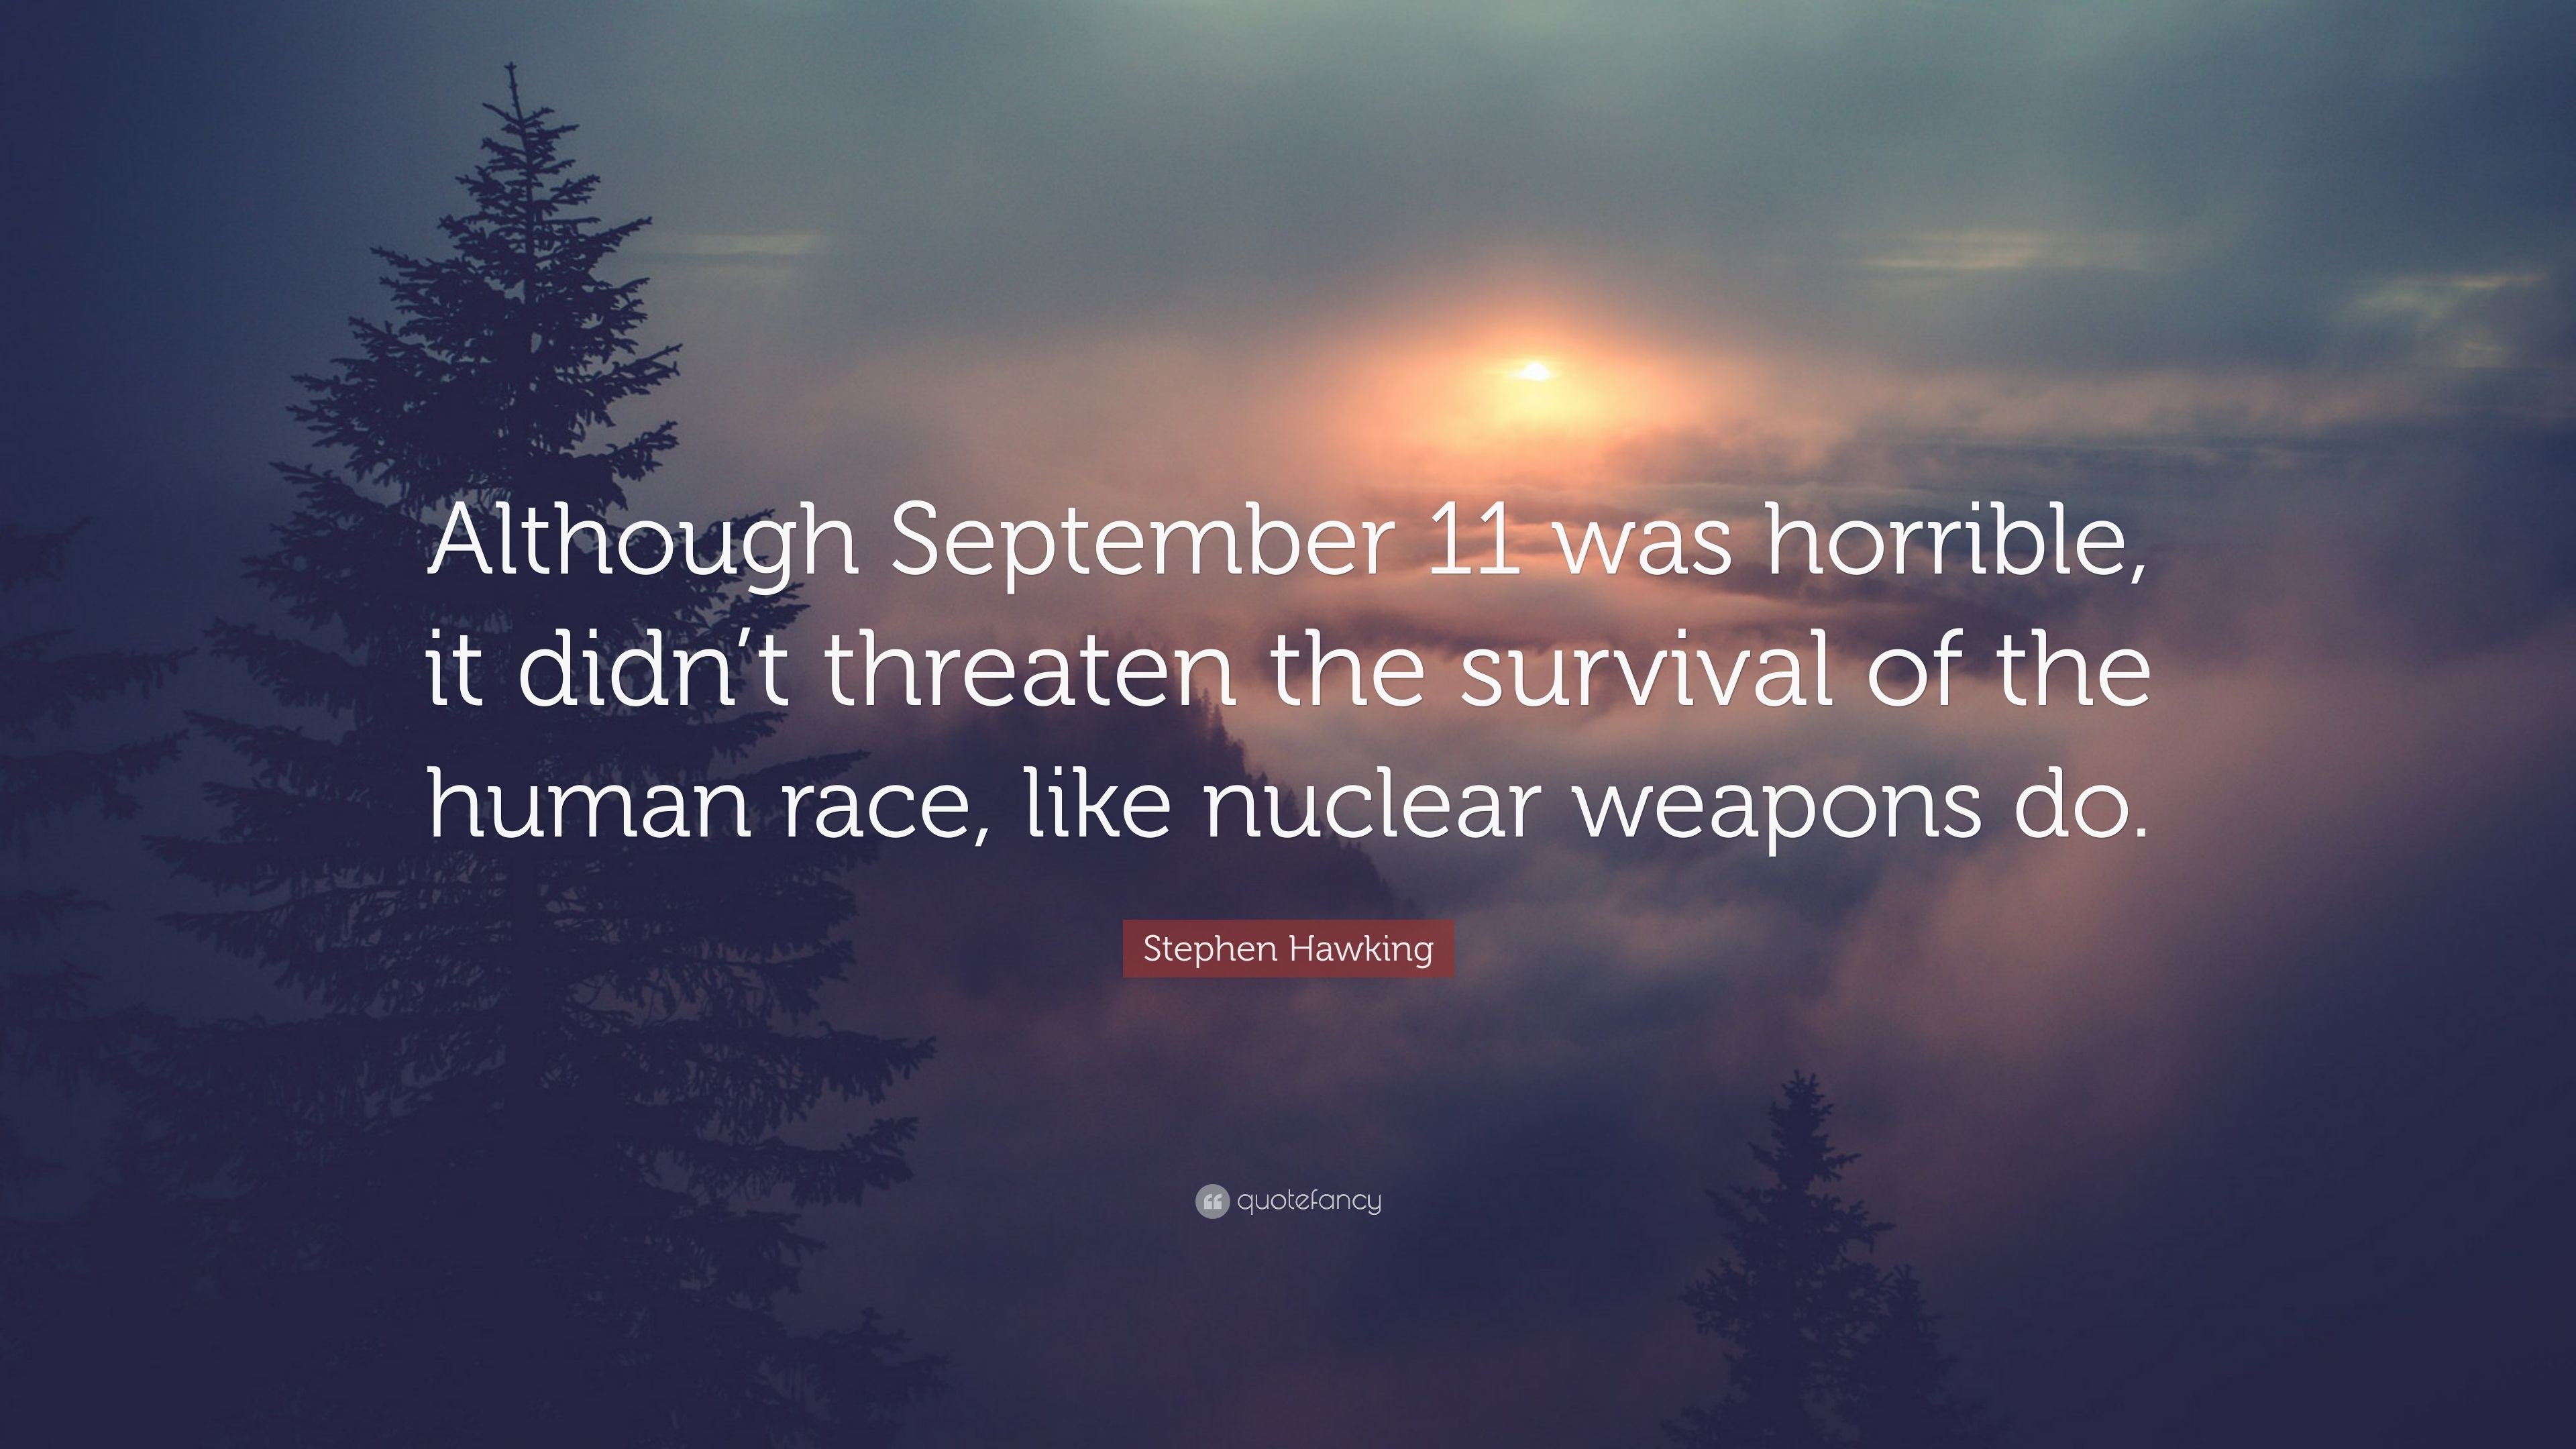 3840x2160 Stephen Hawking Quote: “Although September 11 was horrible, it didn't  threaten